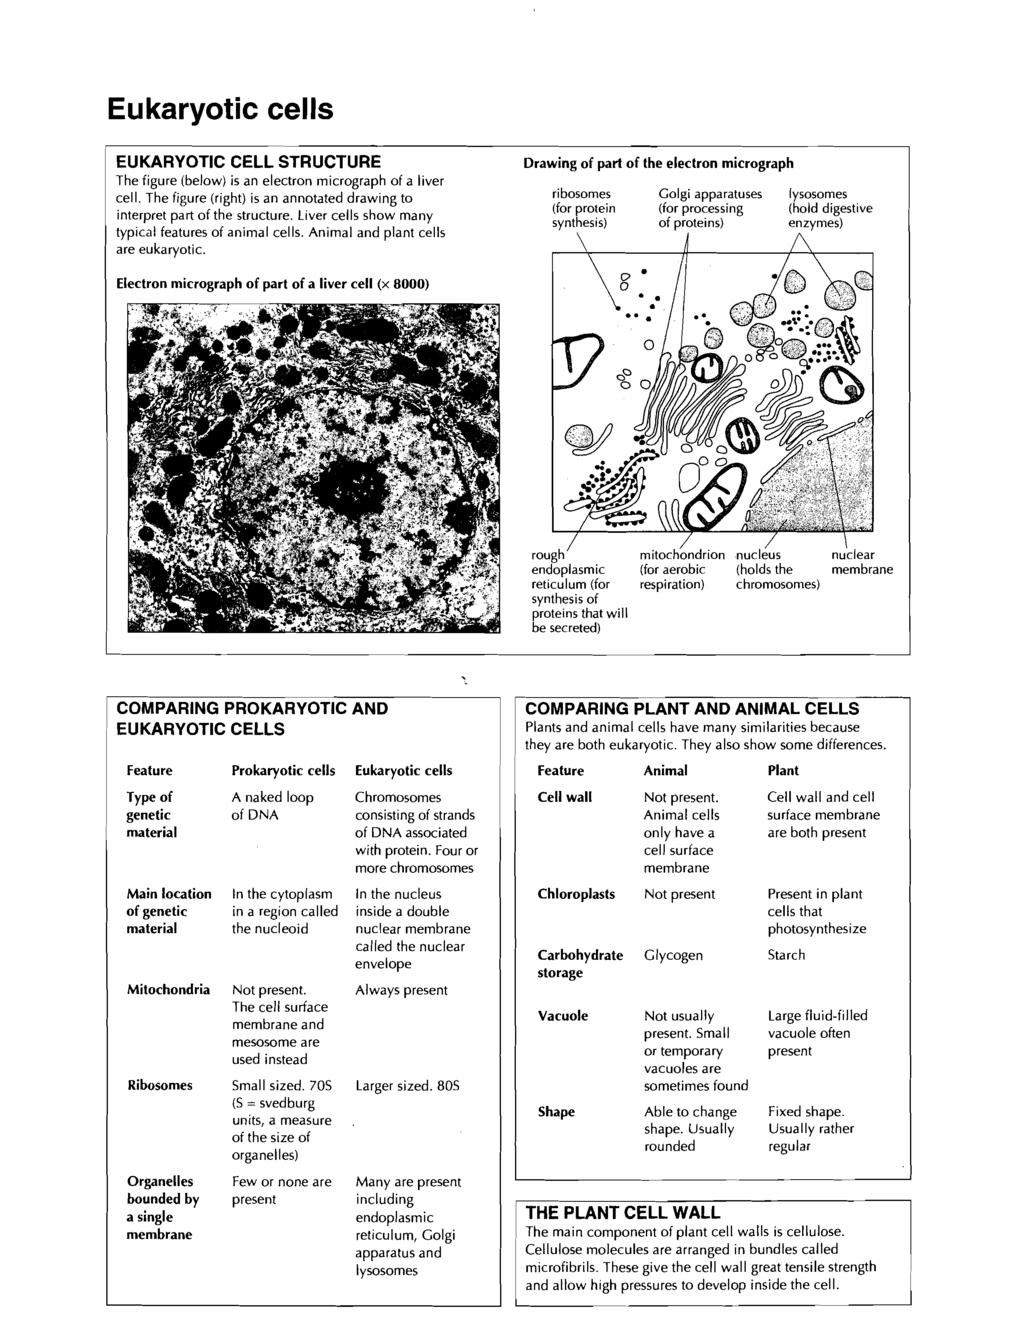 Eukaryotic cells EUKARYOTIC CELL STRUCTURE The figure (below) is an electron micrograph of a liver cell. The figure (right) is an annotated drawing to interpret part of the structure.